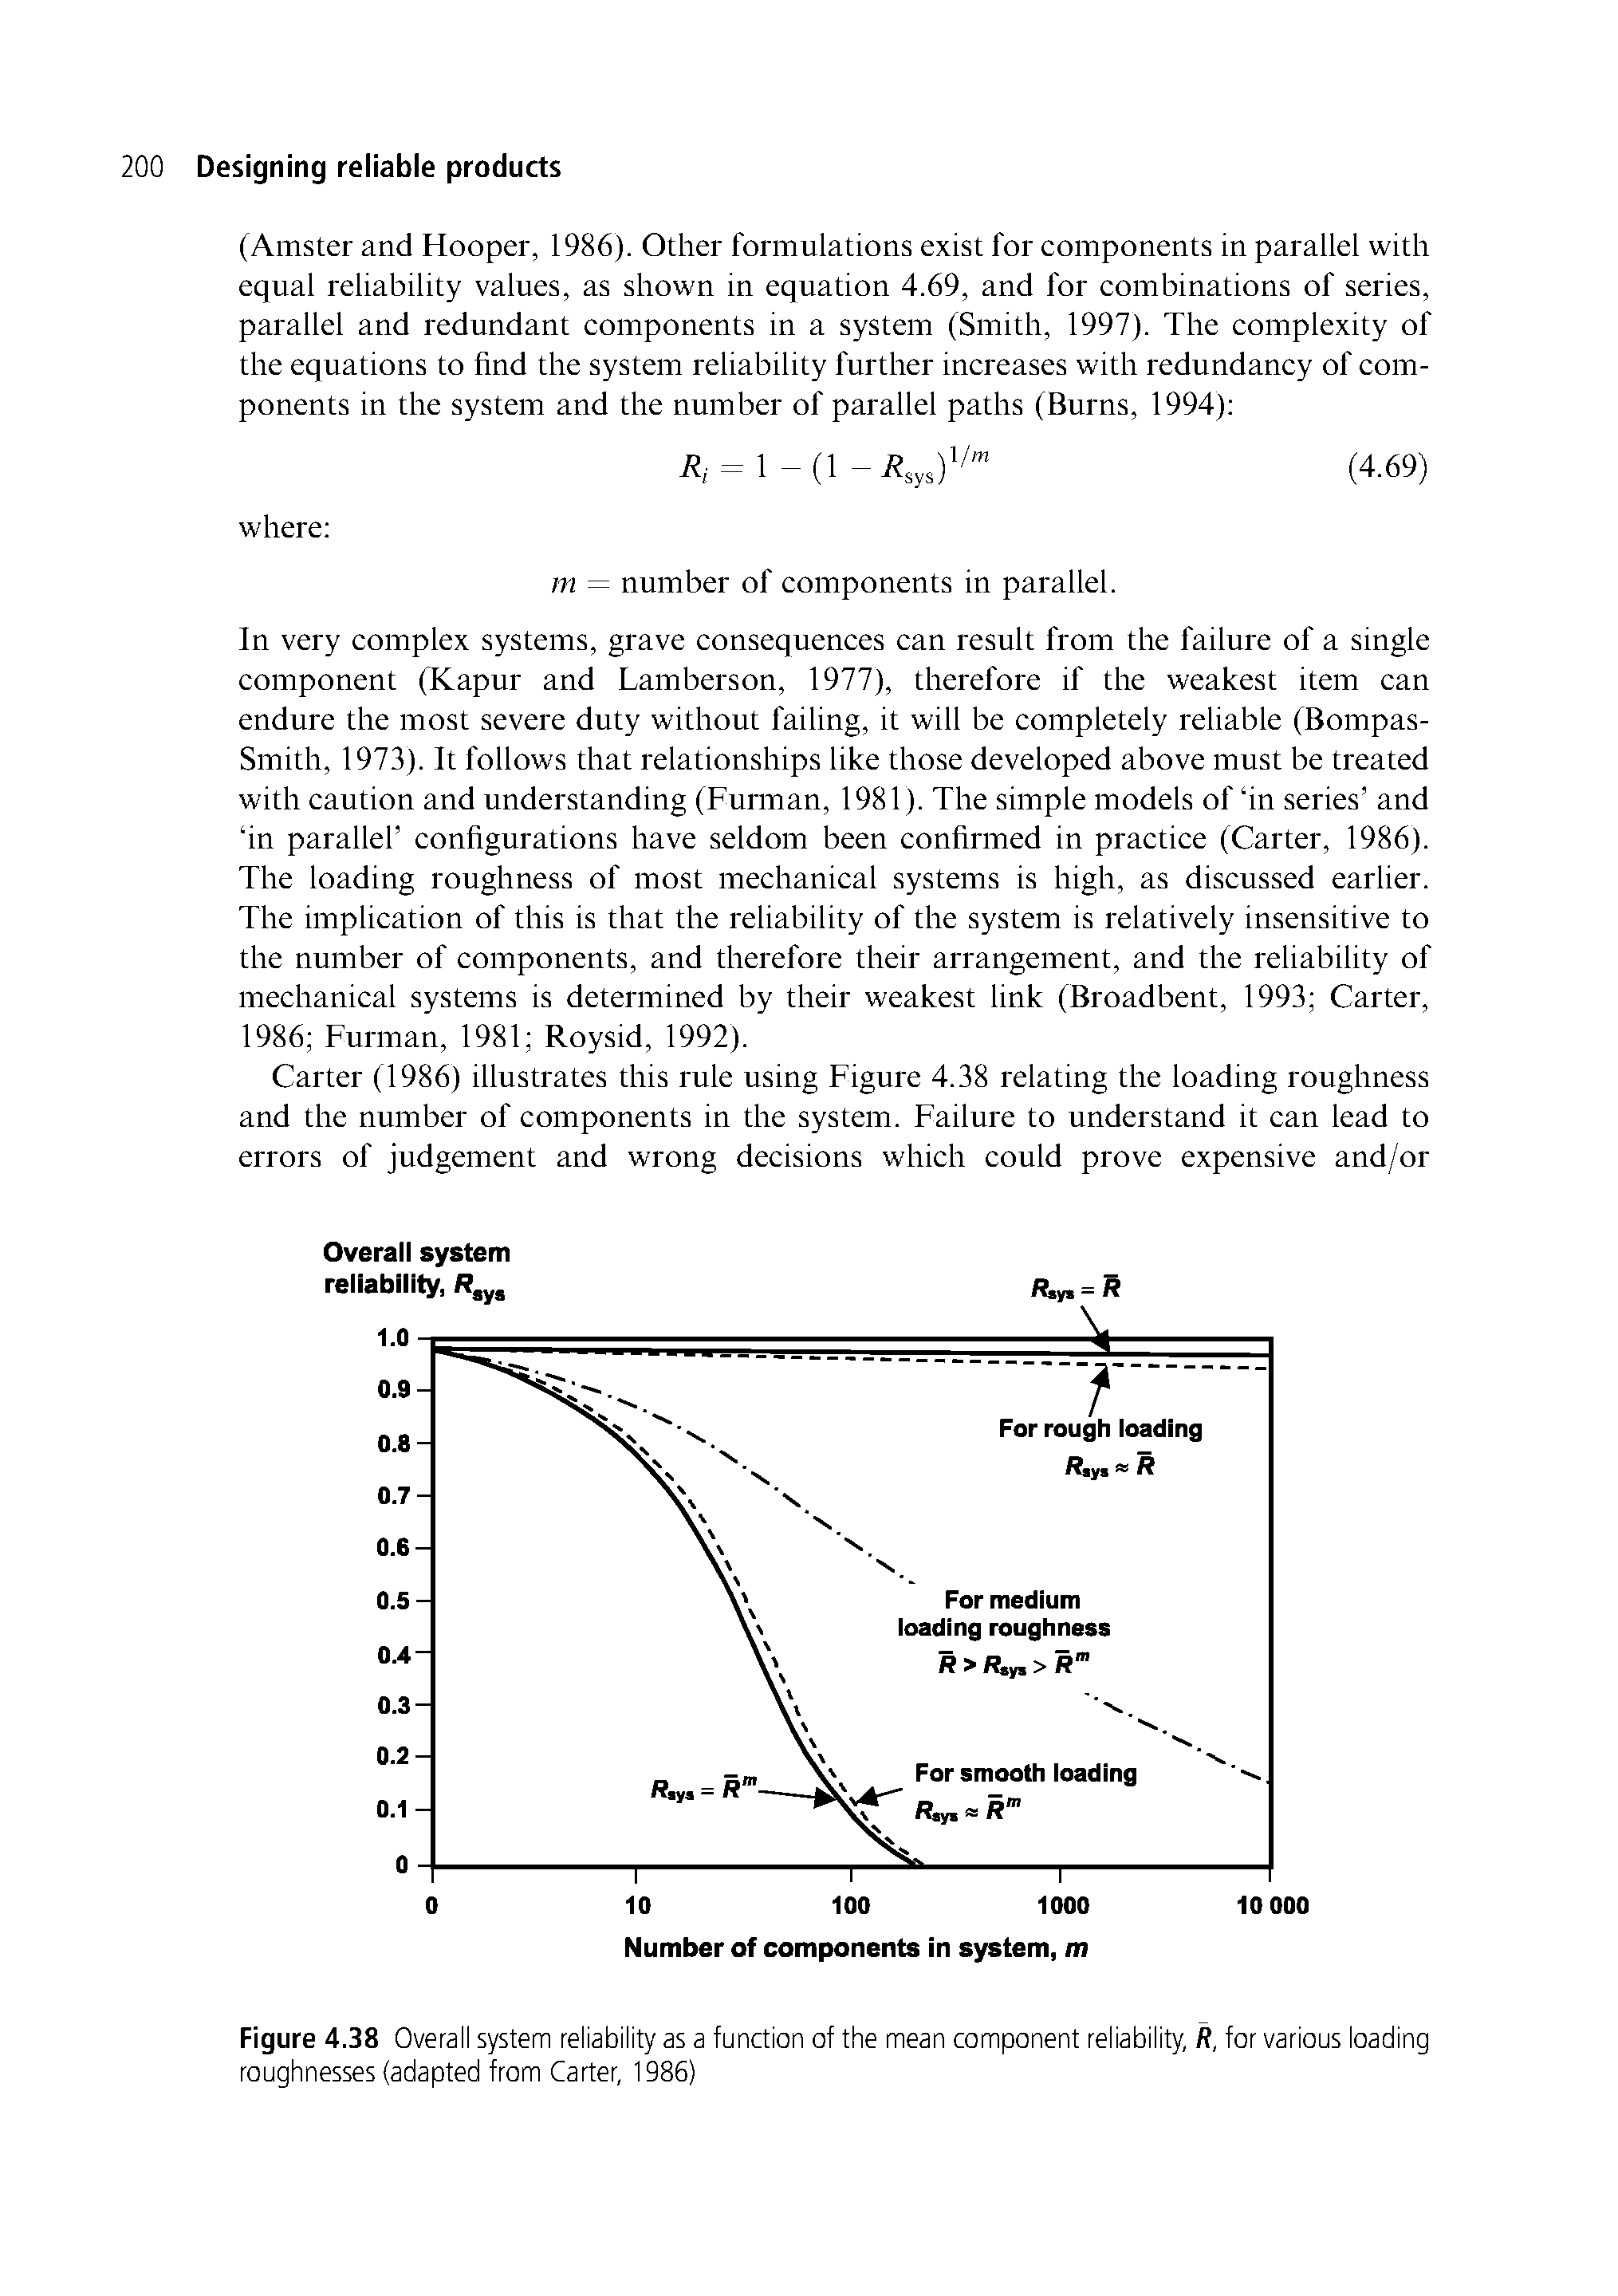 Figure 4.38 Overall system reliability as a function of the mean component reliability, R, for various loading roughnesses (adapted from Carter, 1986)...